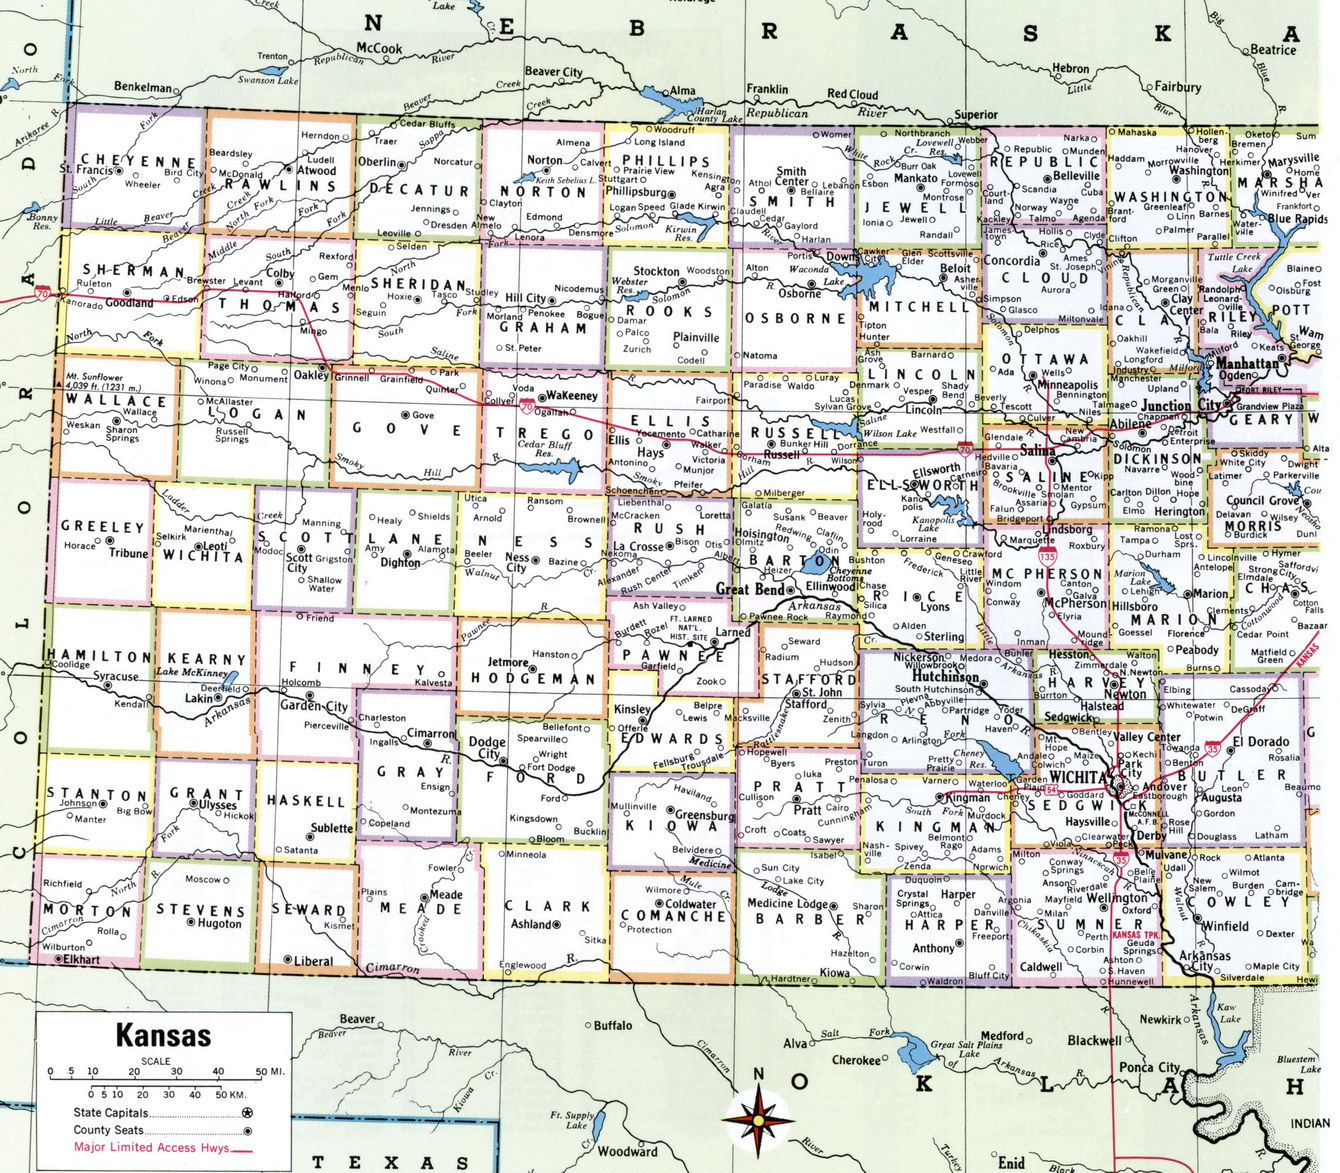 Map of Kansas by county